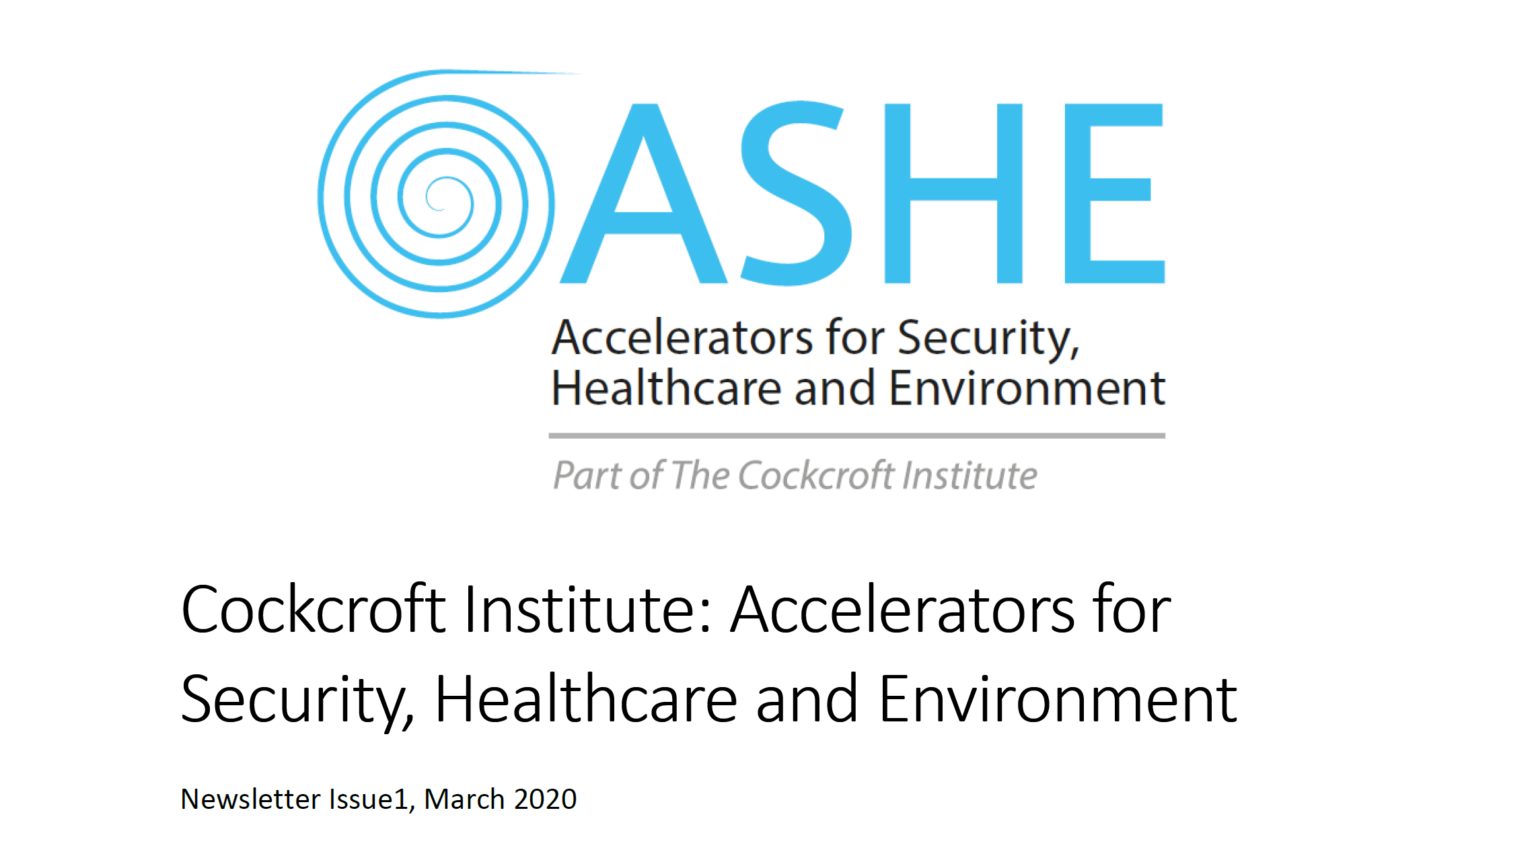 The Cockcroft Institute | Accelerators for Security, Healthcare and the